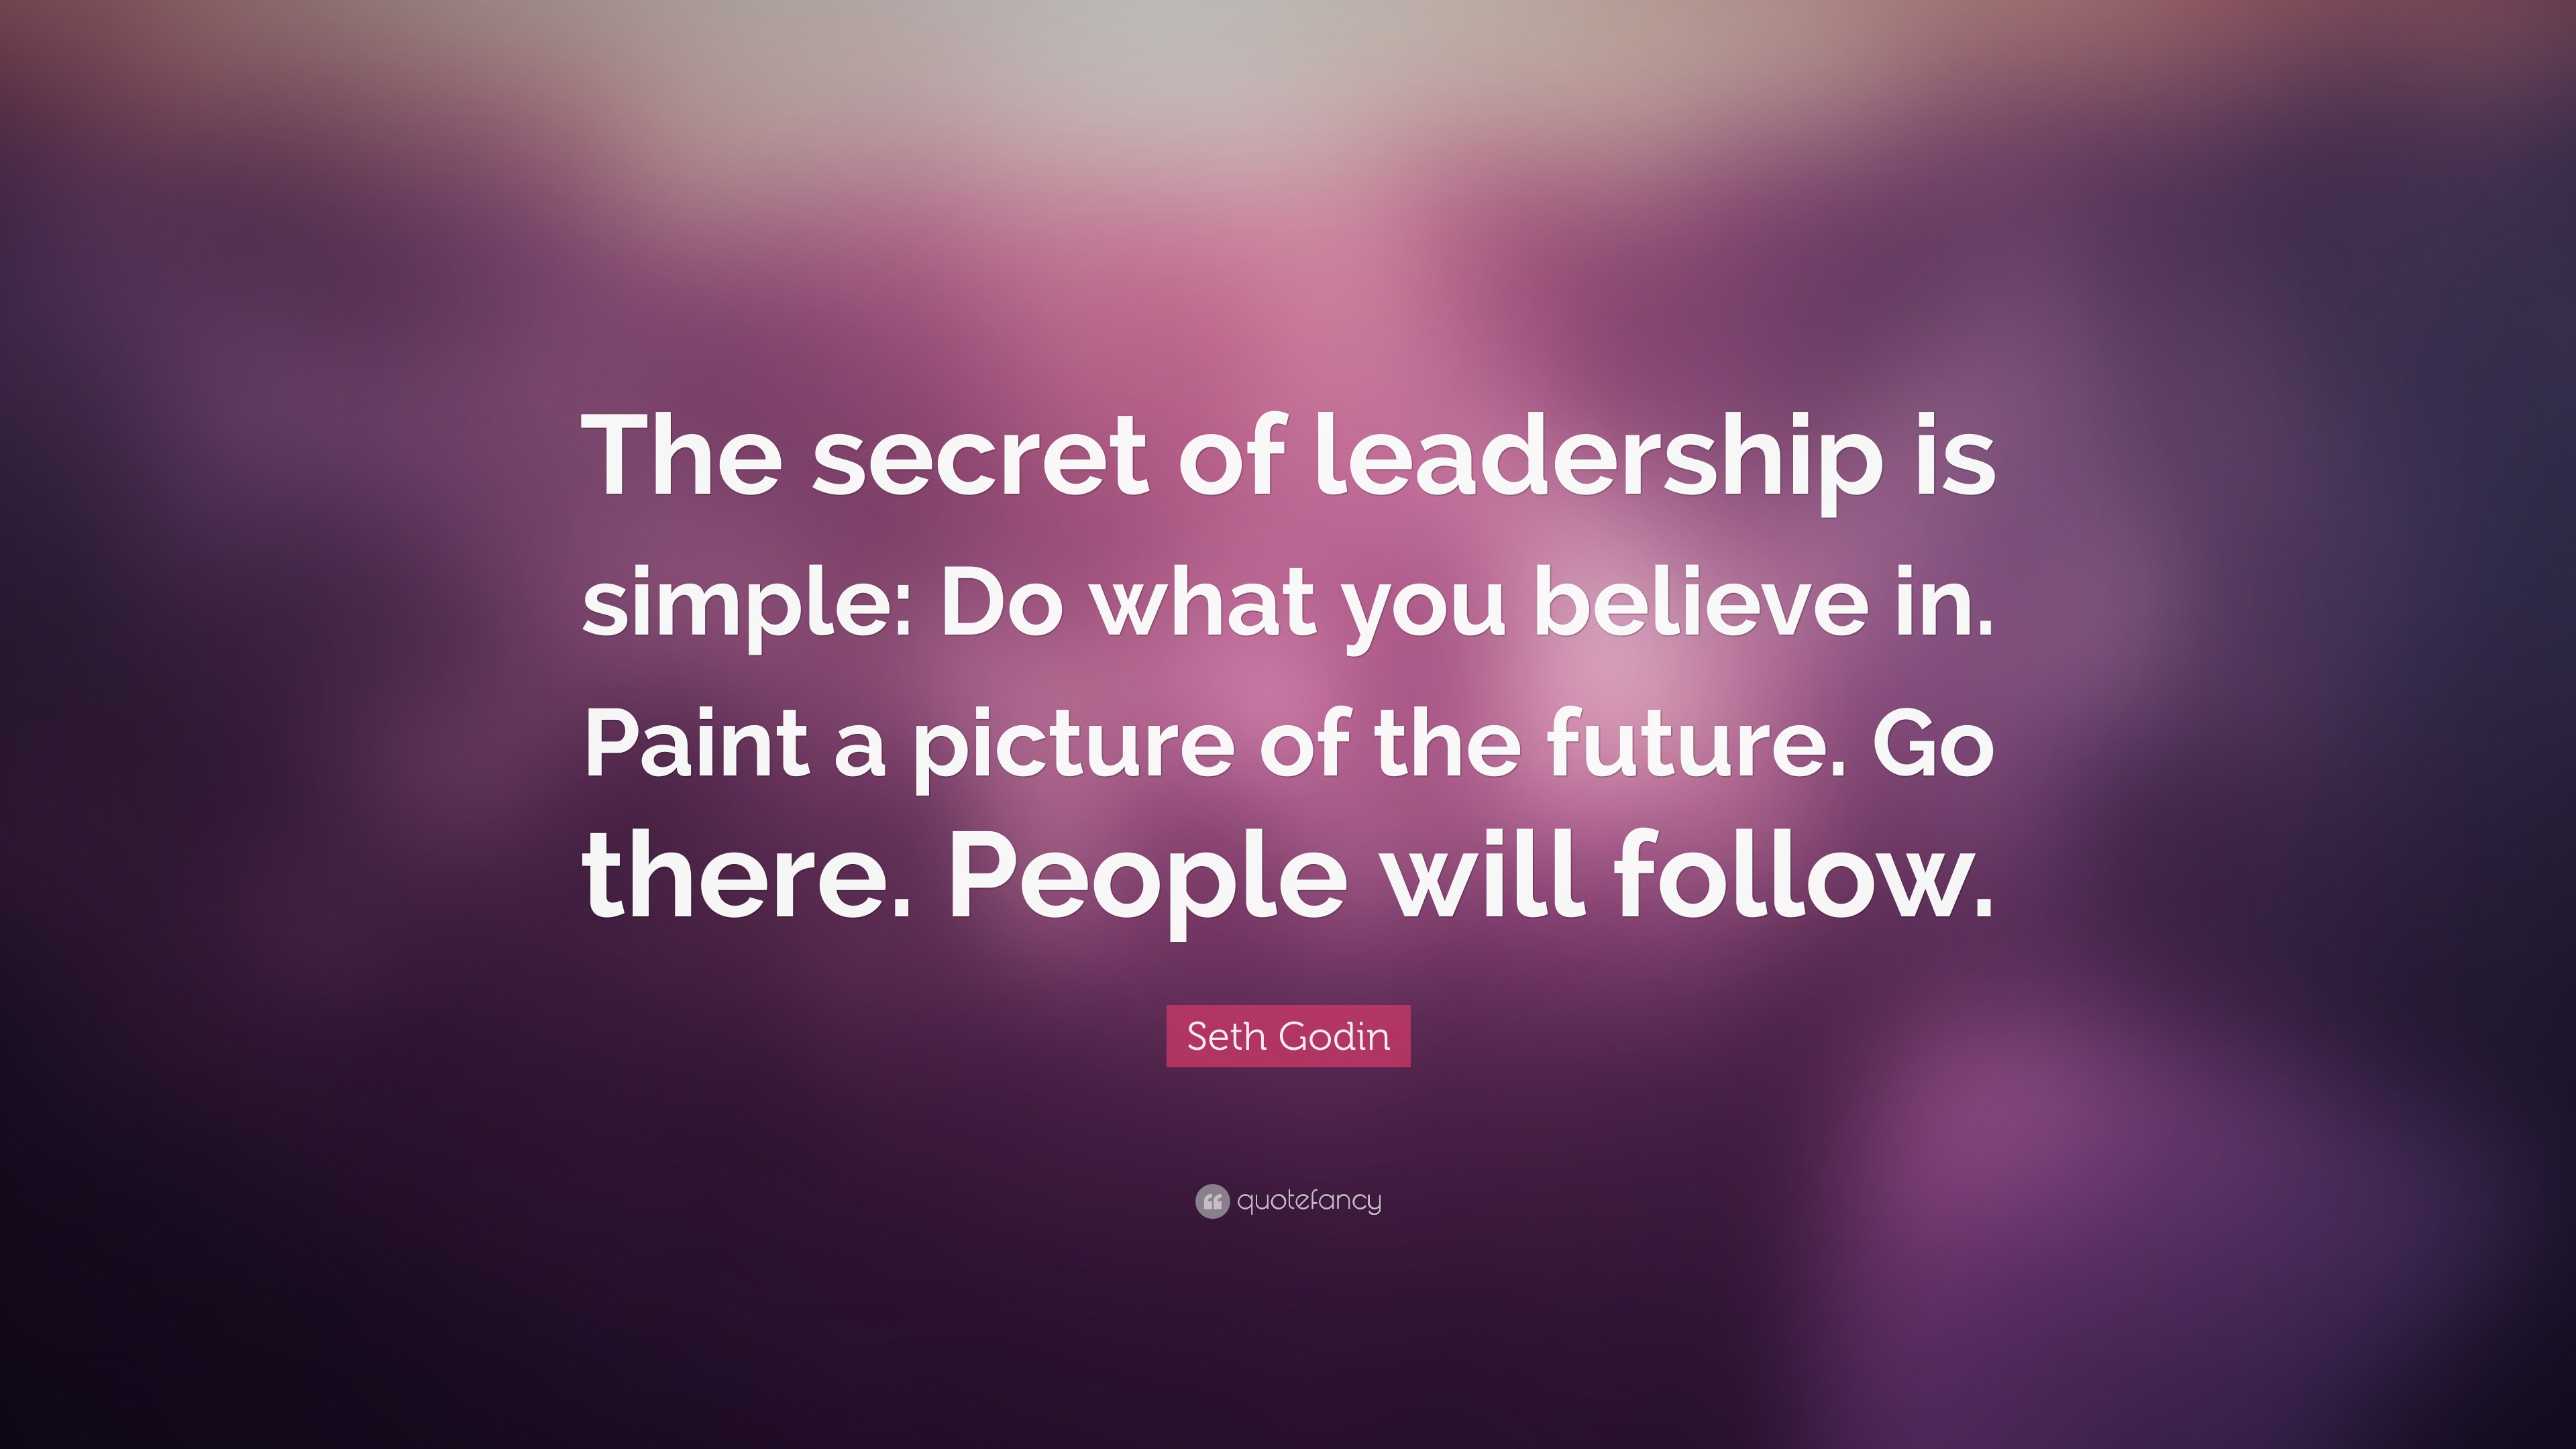 Seth Godin Quote: “The secret of leadership is simple: Do what you ...